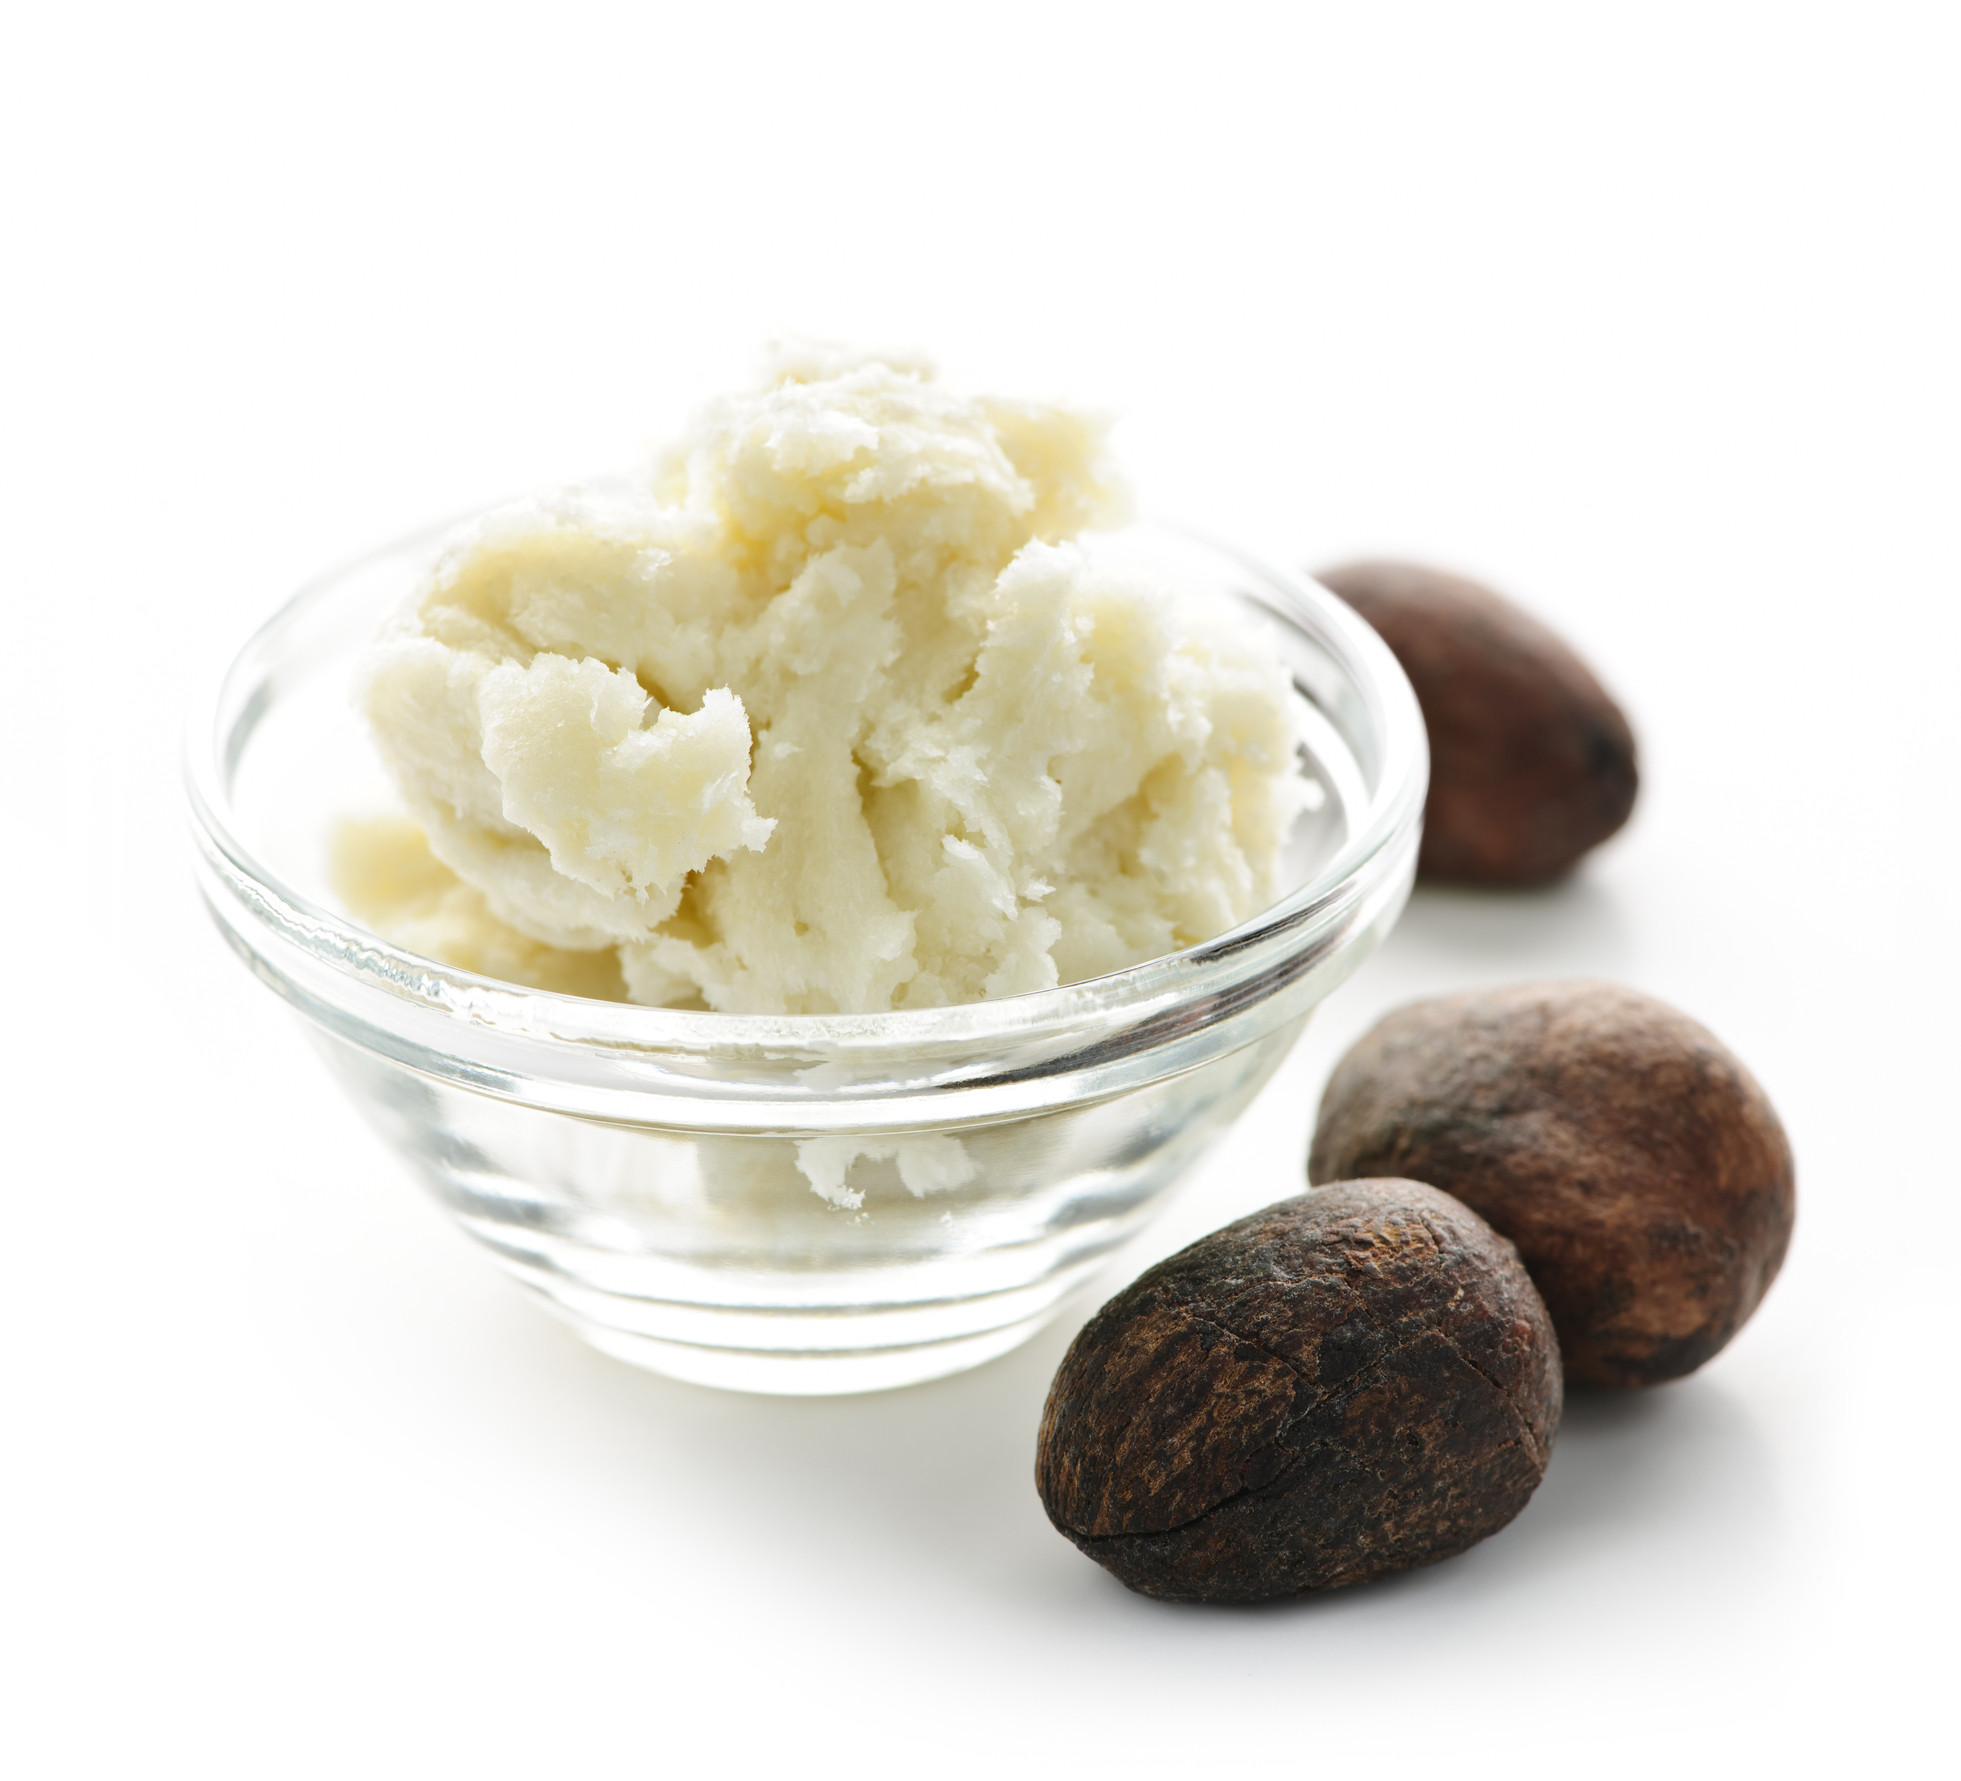 Why is Shea Butter is Good For Your Skin?